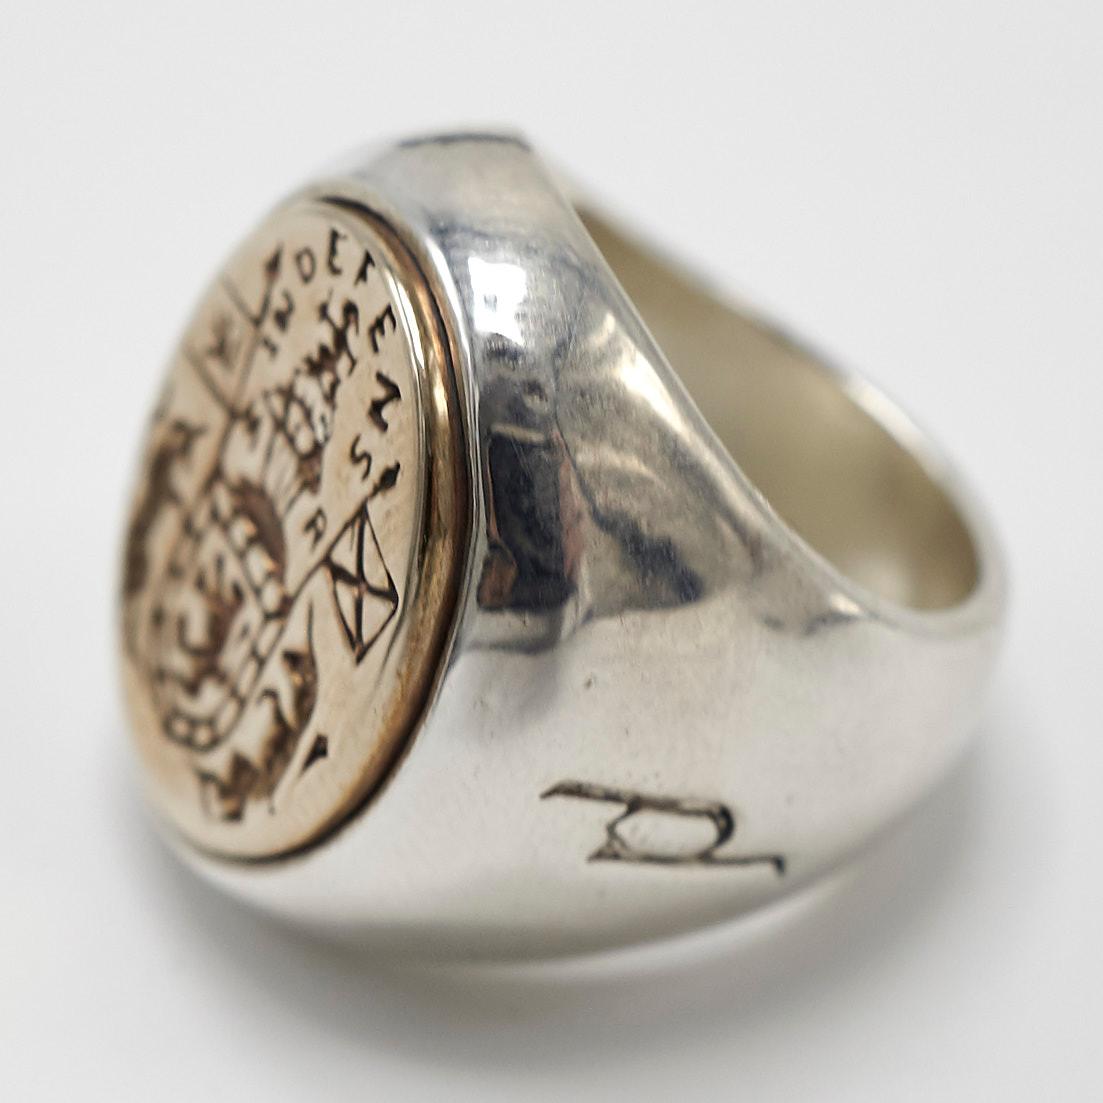 Crest Signet Ring Solid Silver Bronze Crest J Dauphin. The ring is made in solid silver and has the crest made in brons, We can also make the ring entirely in silver on request.

Inspired by Queen Mary of Scots ring. Gold signet-ring; engraved;